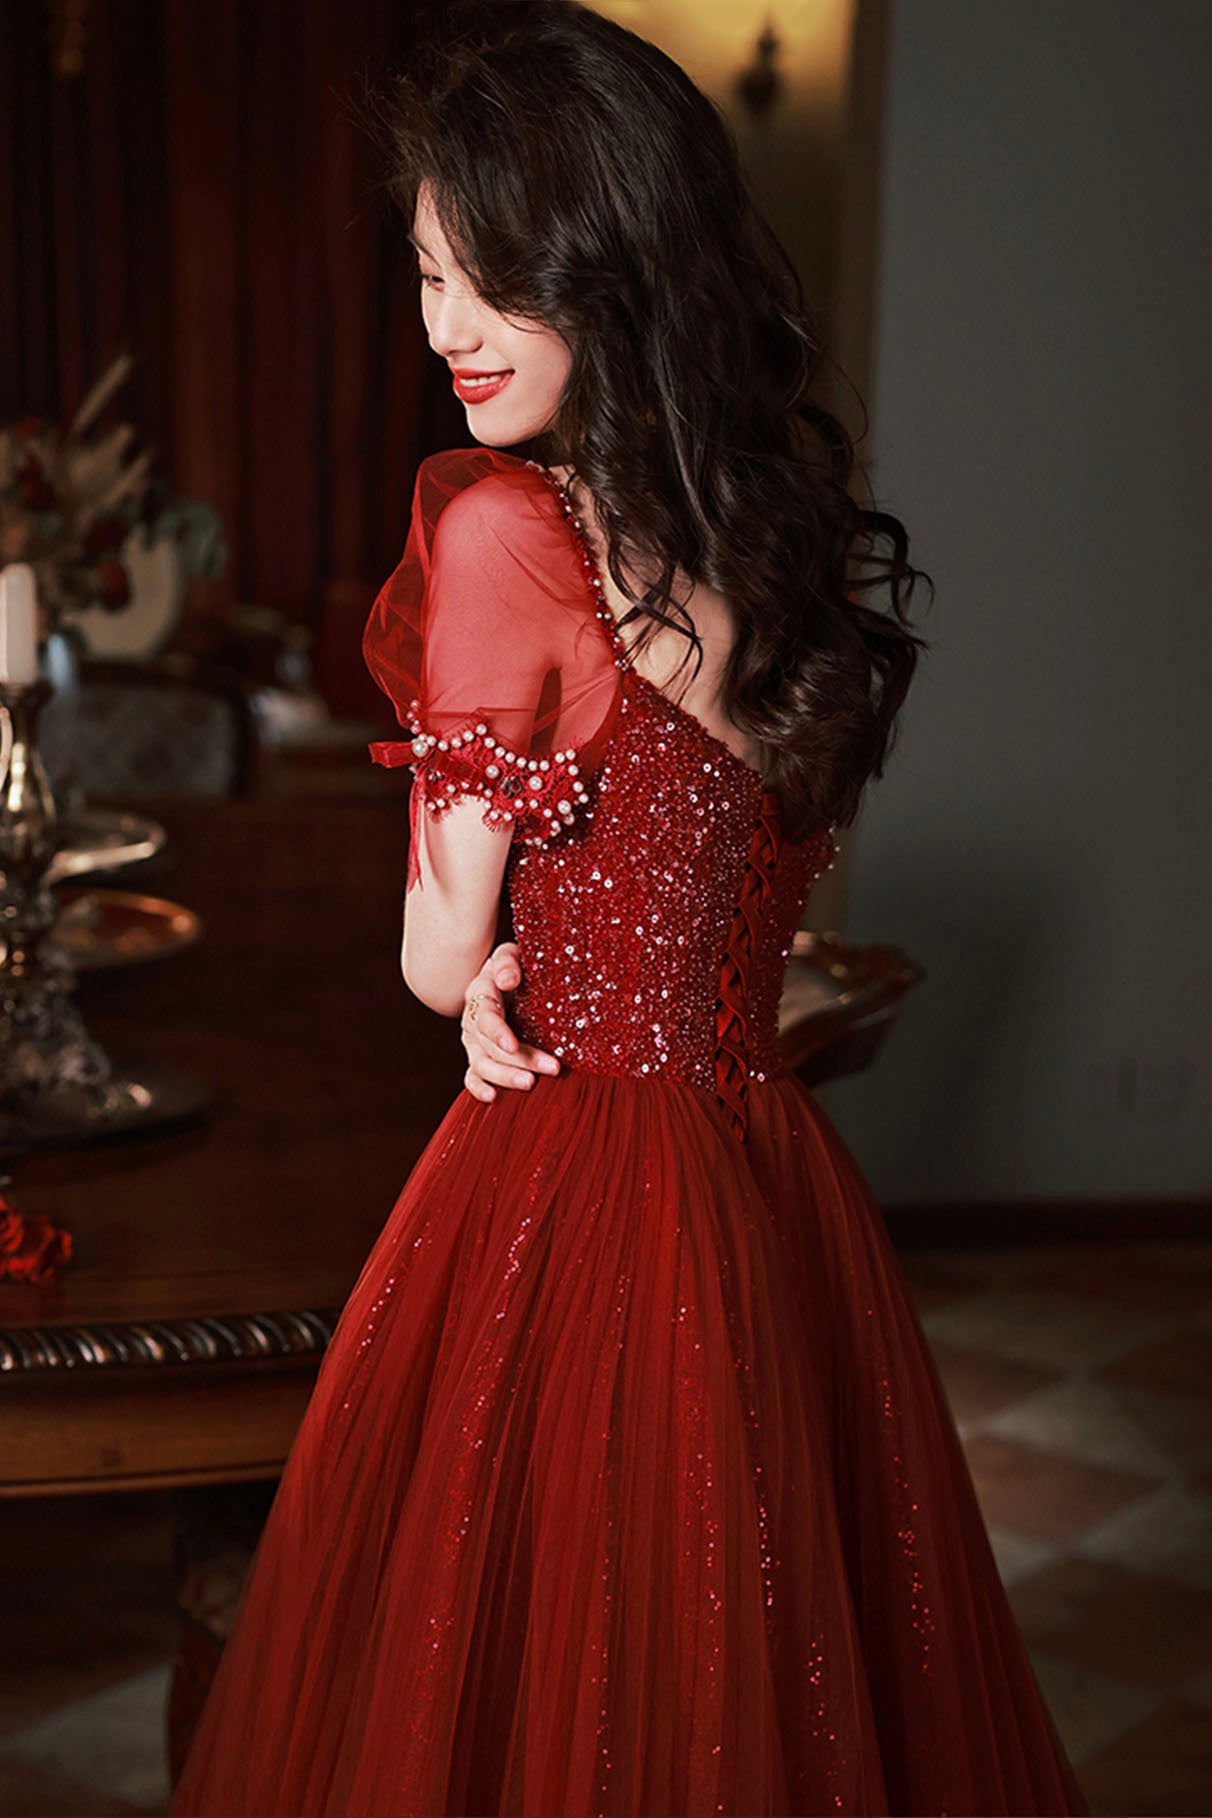 Burgundy Beaded Chic Long A-Line Prom Dress, Cute Short Sleeve Party Dress